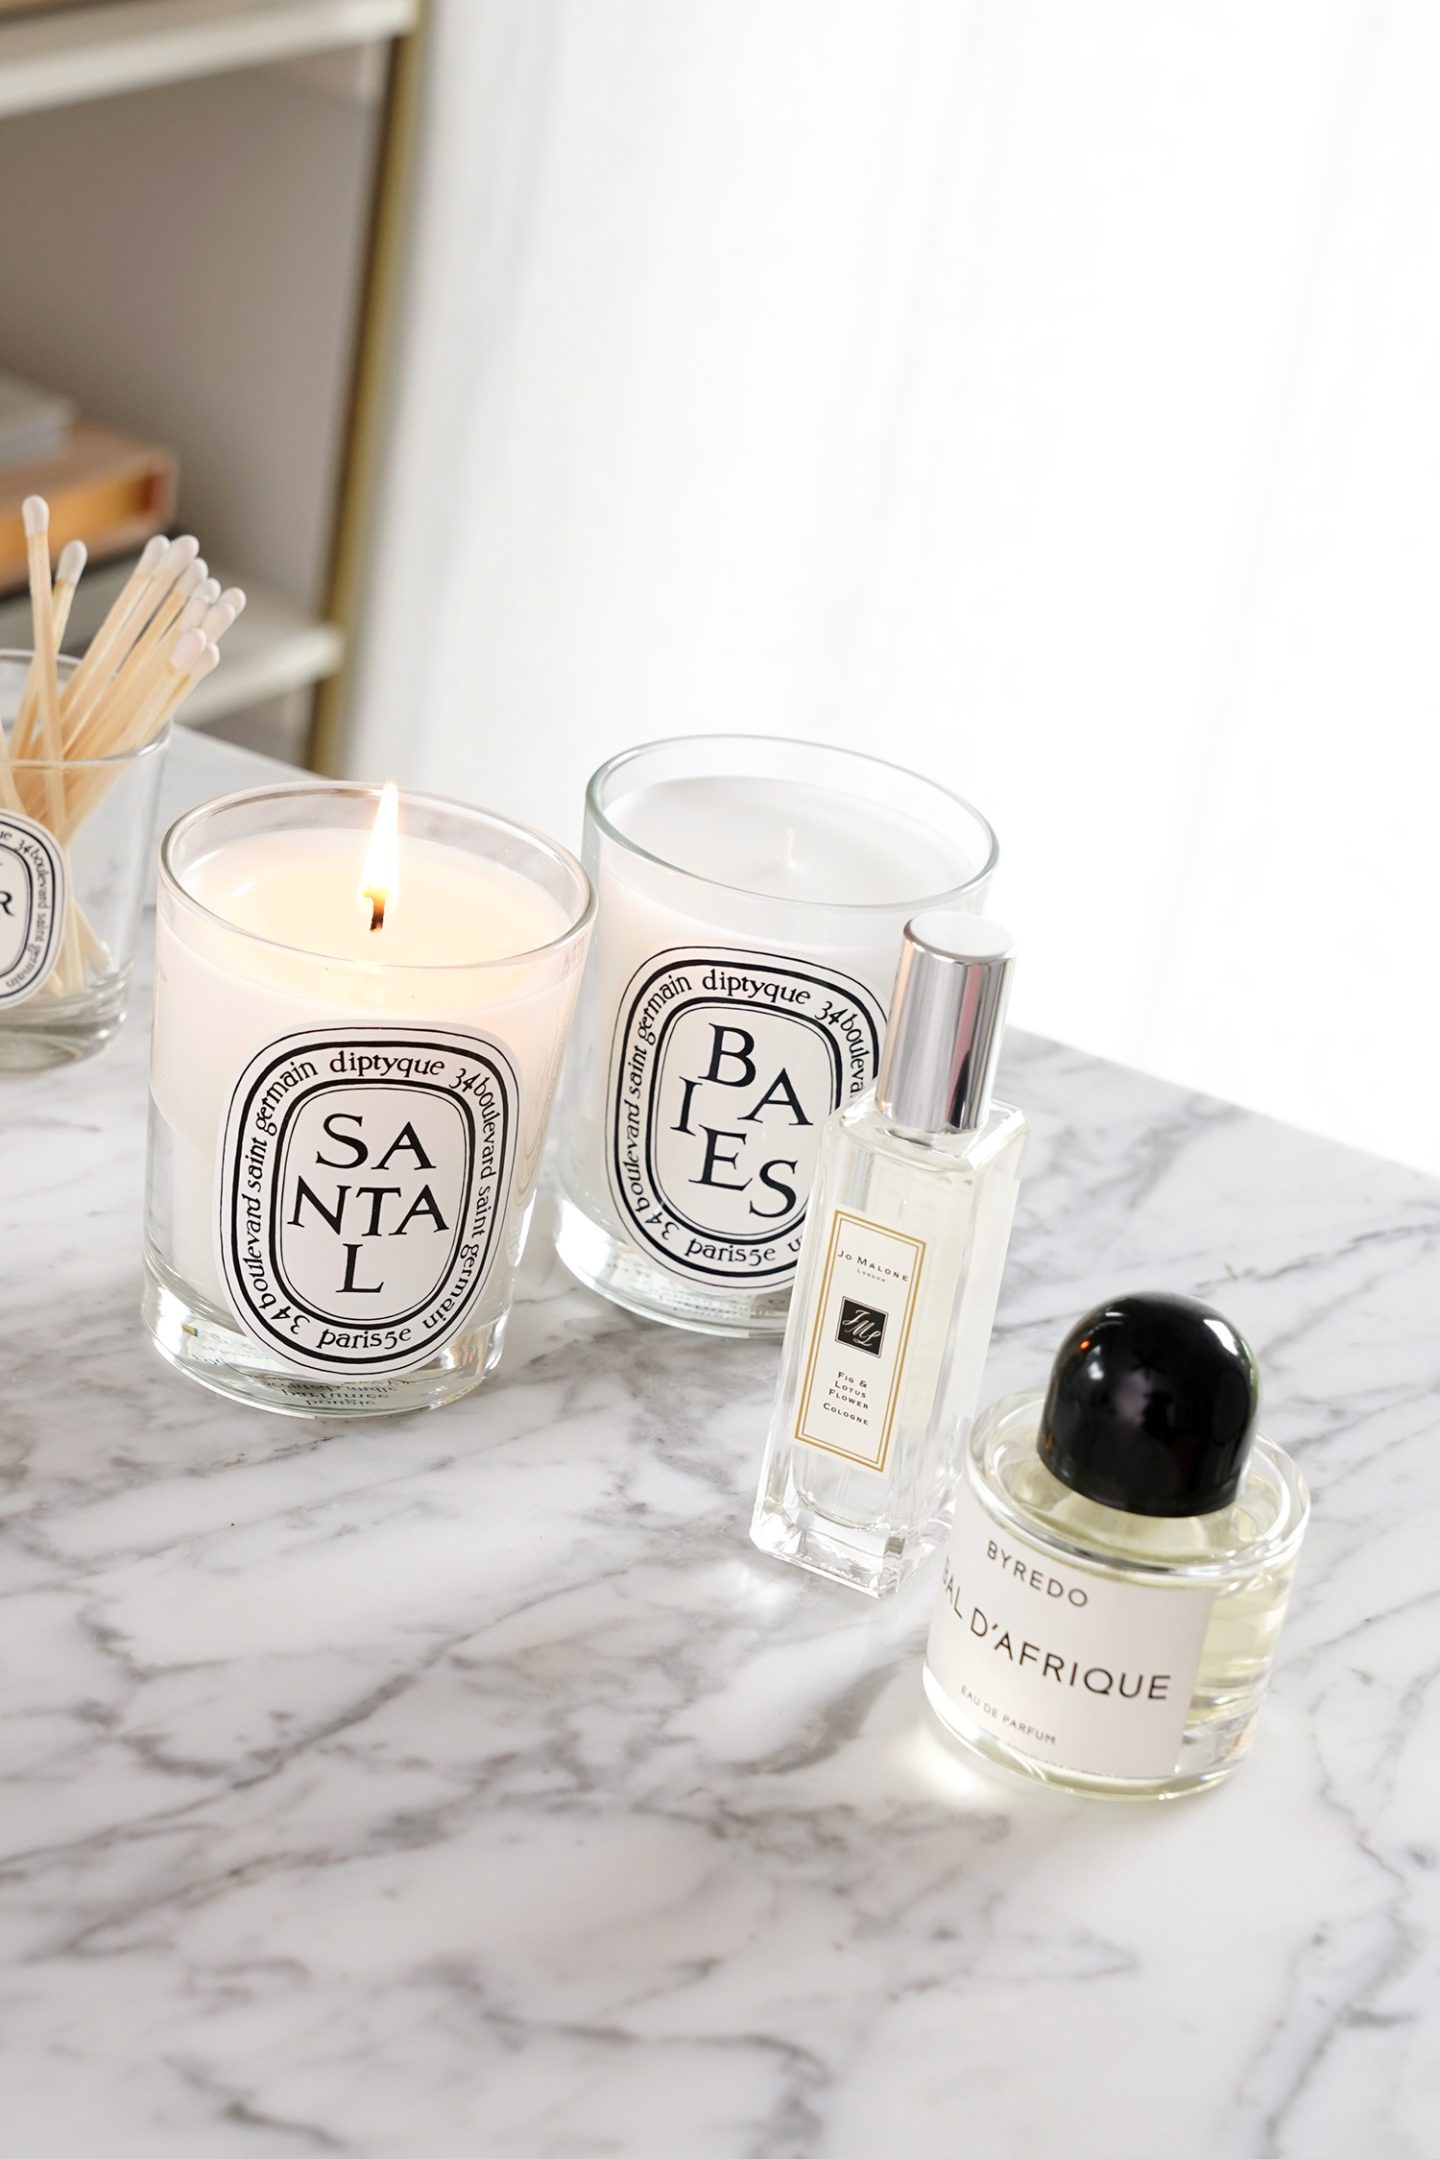 Best Scents for Fall Diptyque Santal, Baies, Byredo